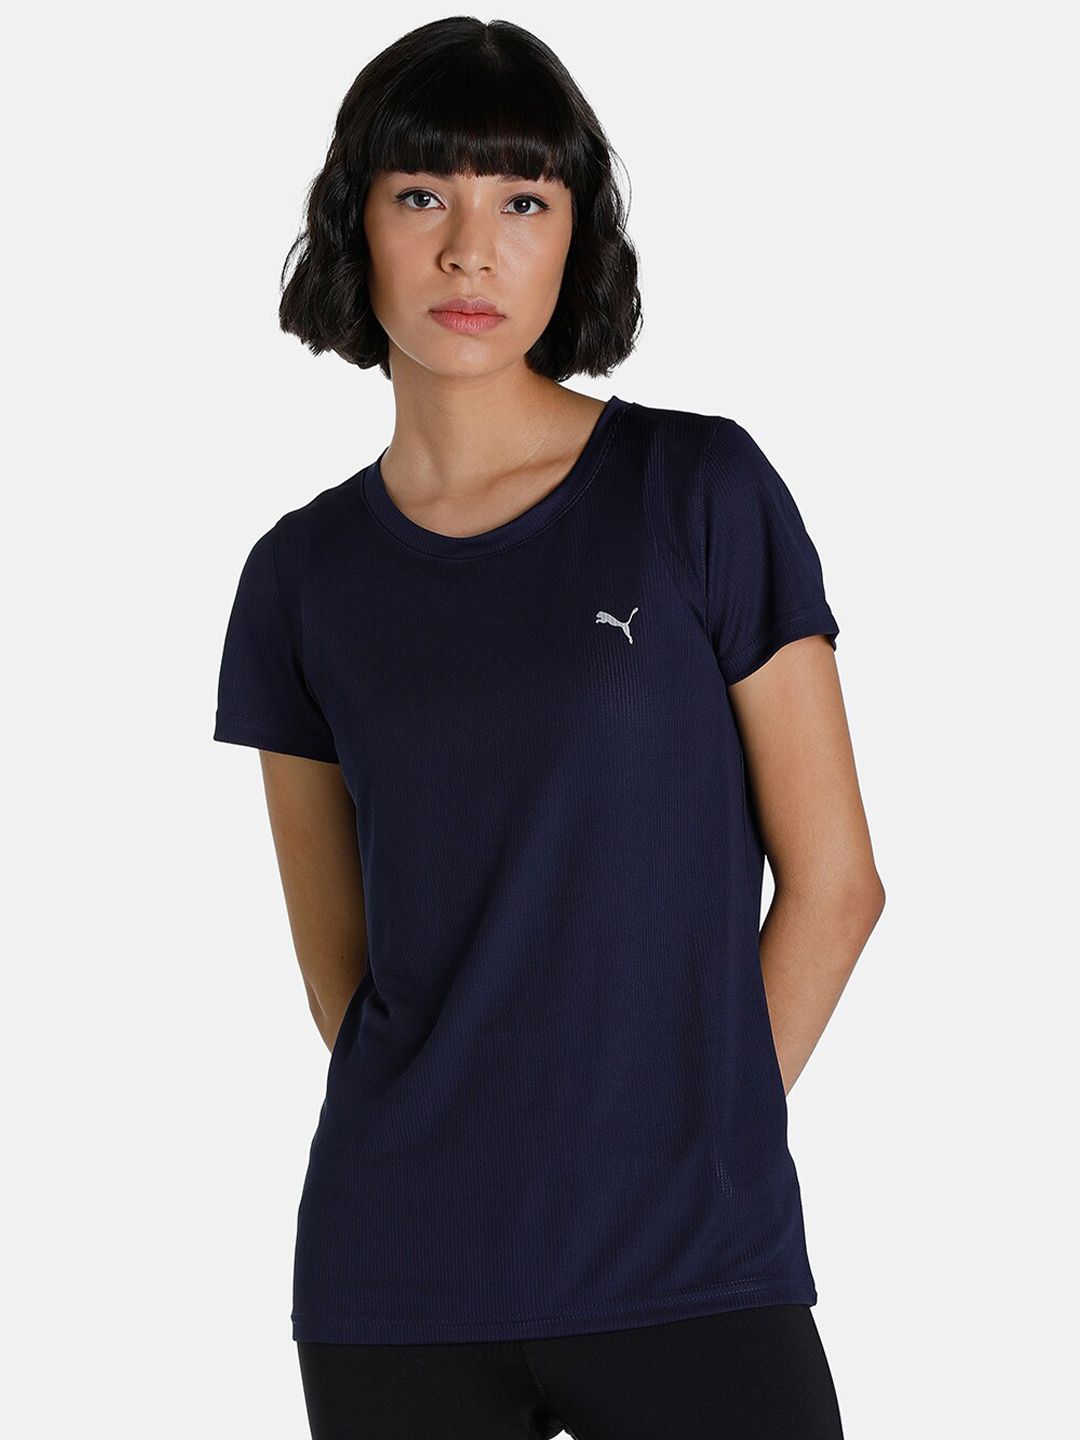 Puma Women Navy Blue Performance Regular Fit Training dryCELL T-shirt Price in India